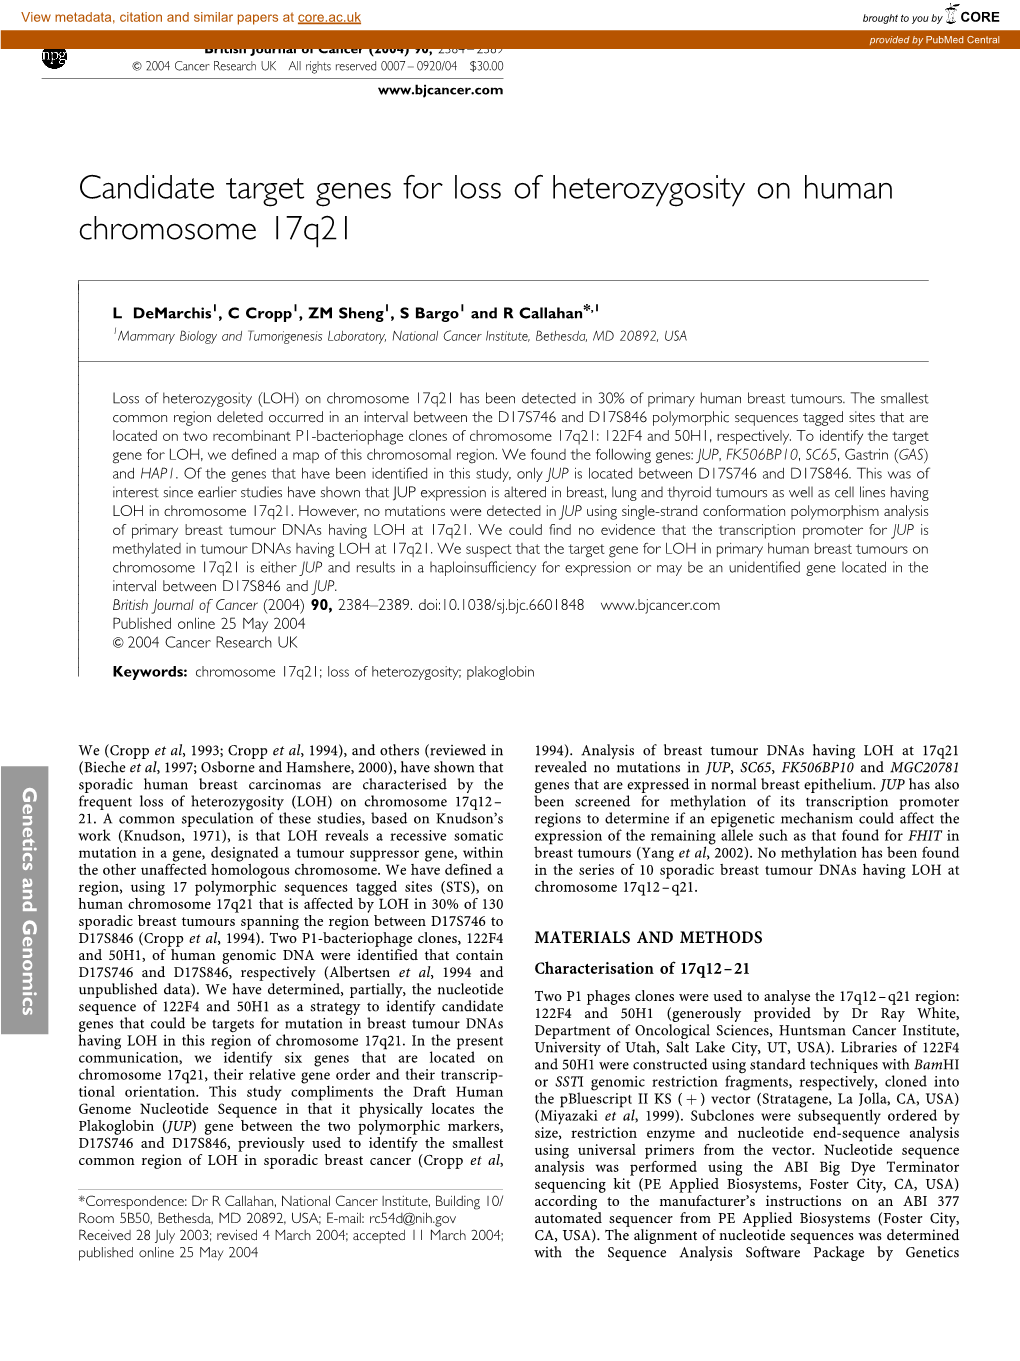 Candidate Target Genes for Loss of Heterozygosity on Human Chromosome 17Q21